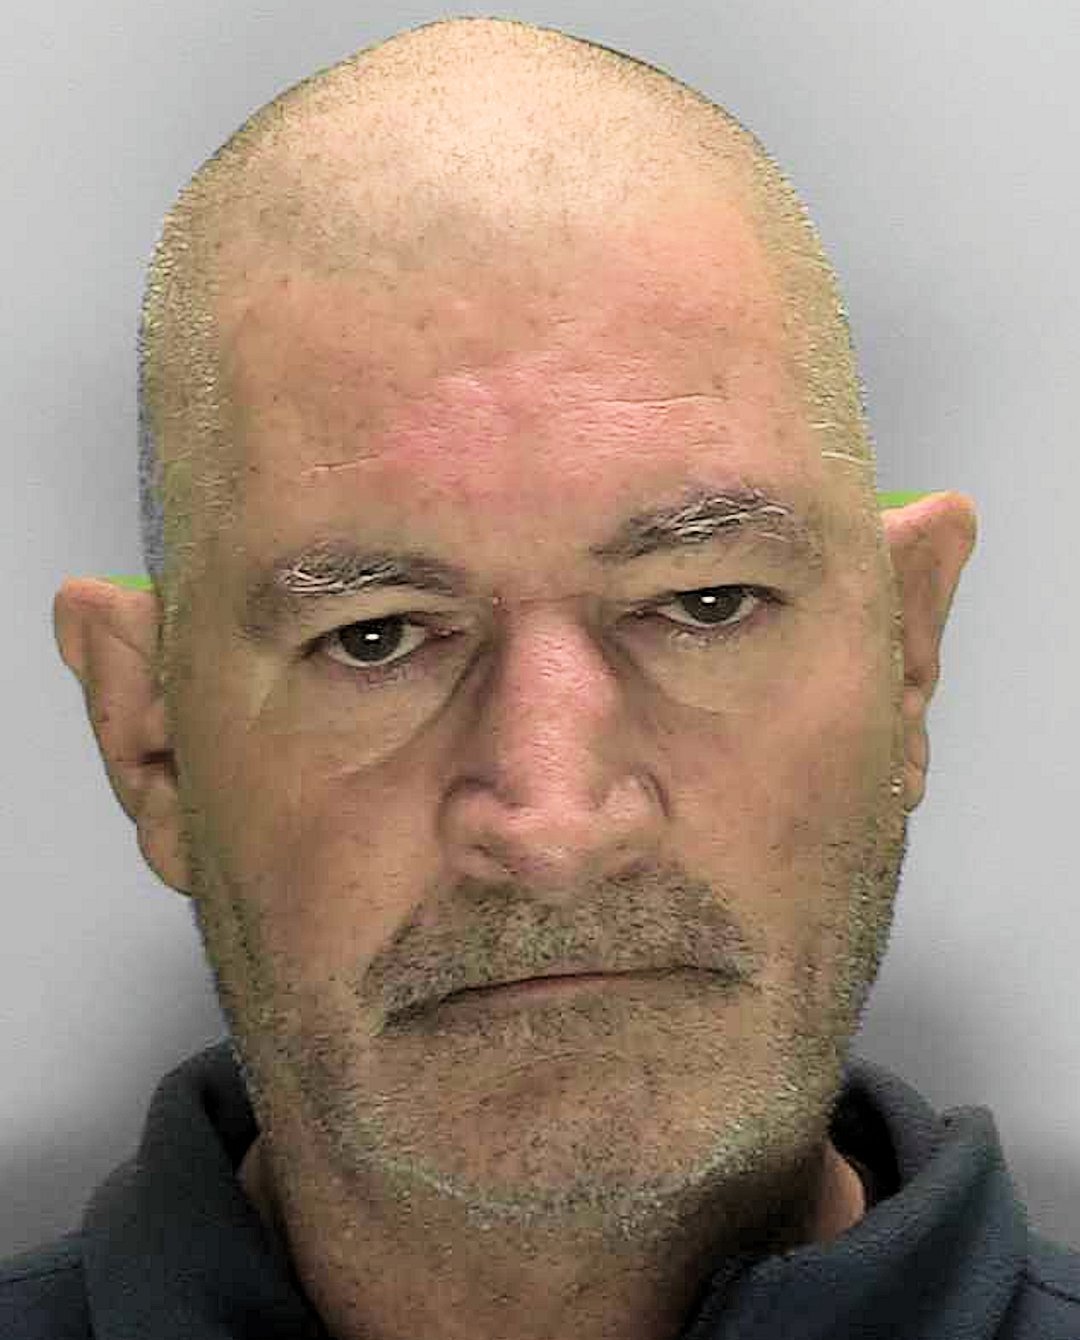 Crawley paedophile Stephen Waddingham has been jailed for breaking his suspended sentence